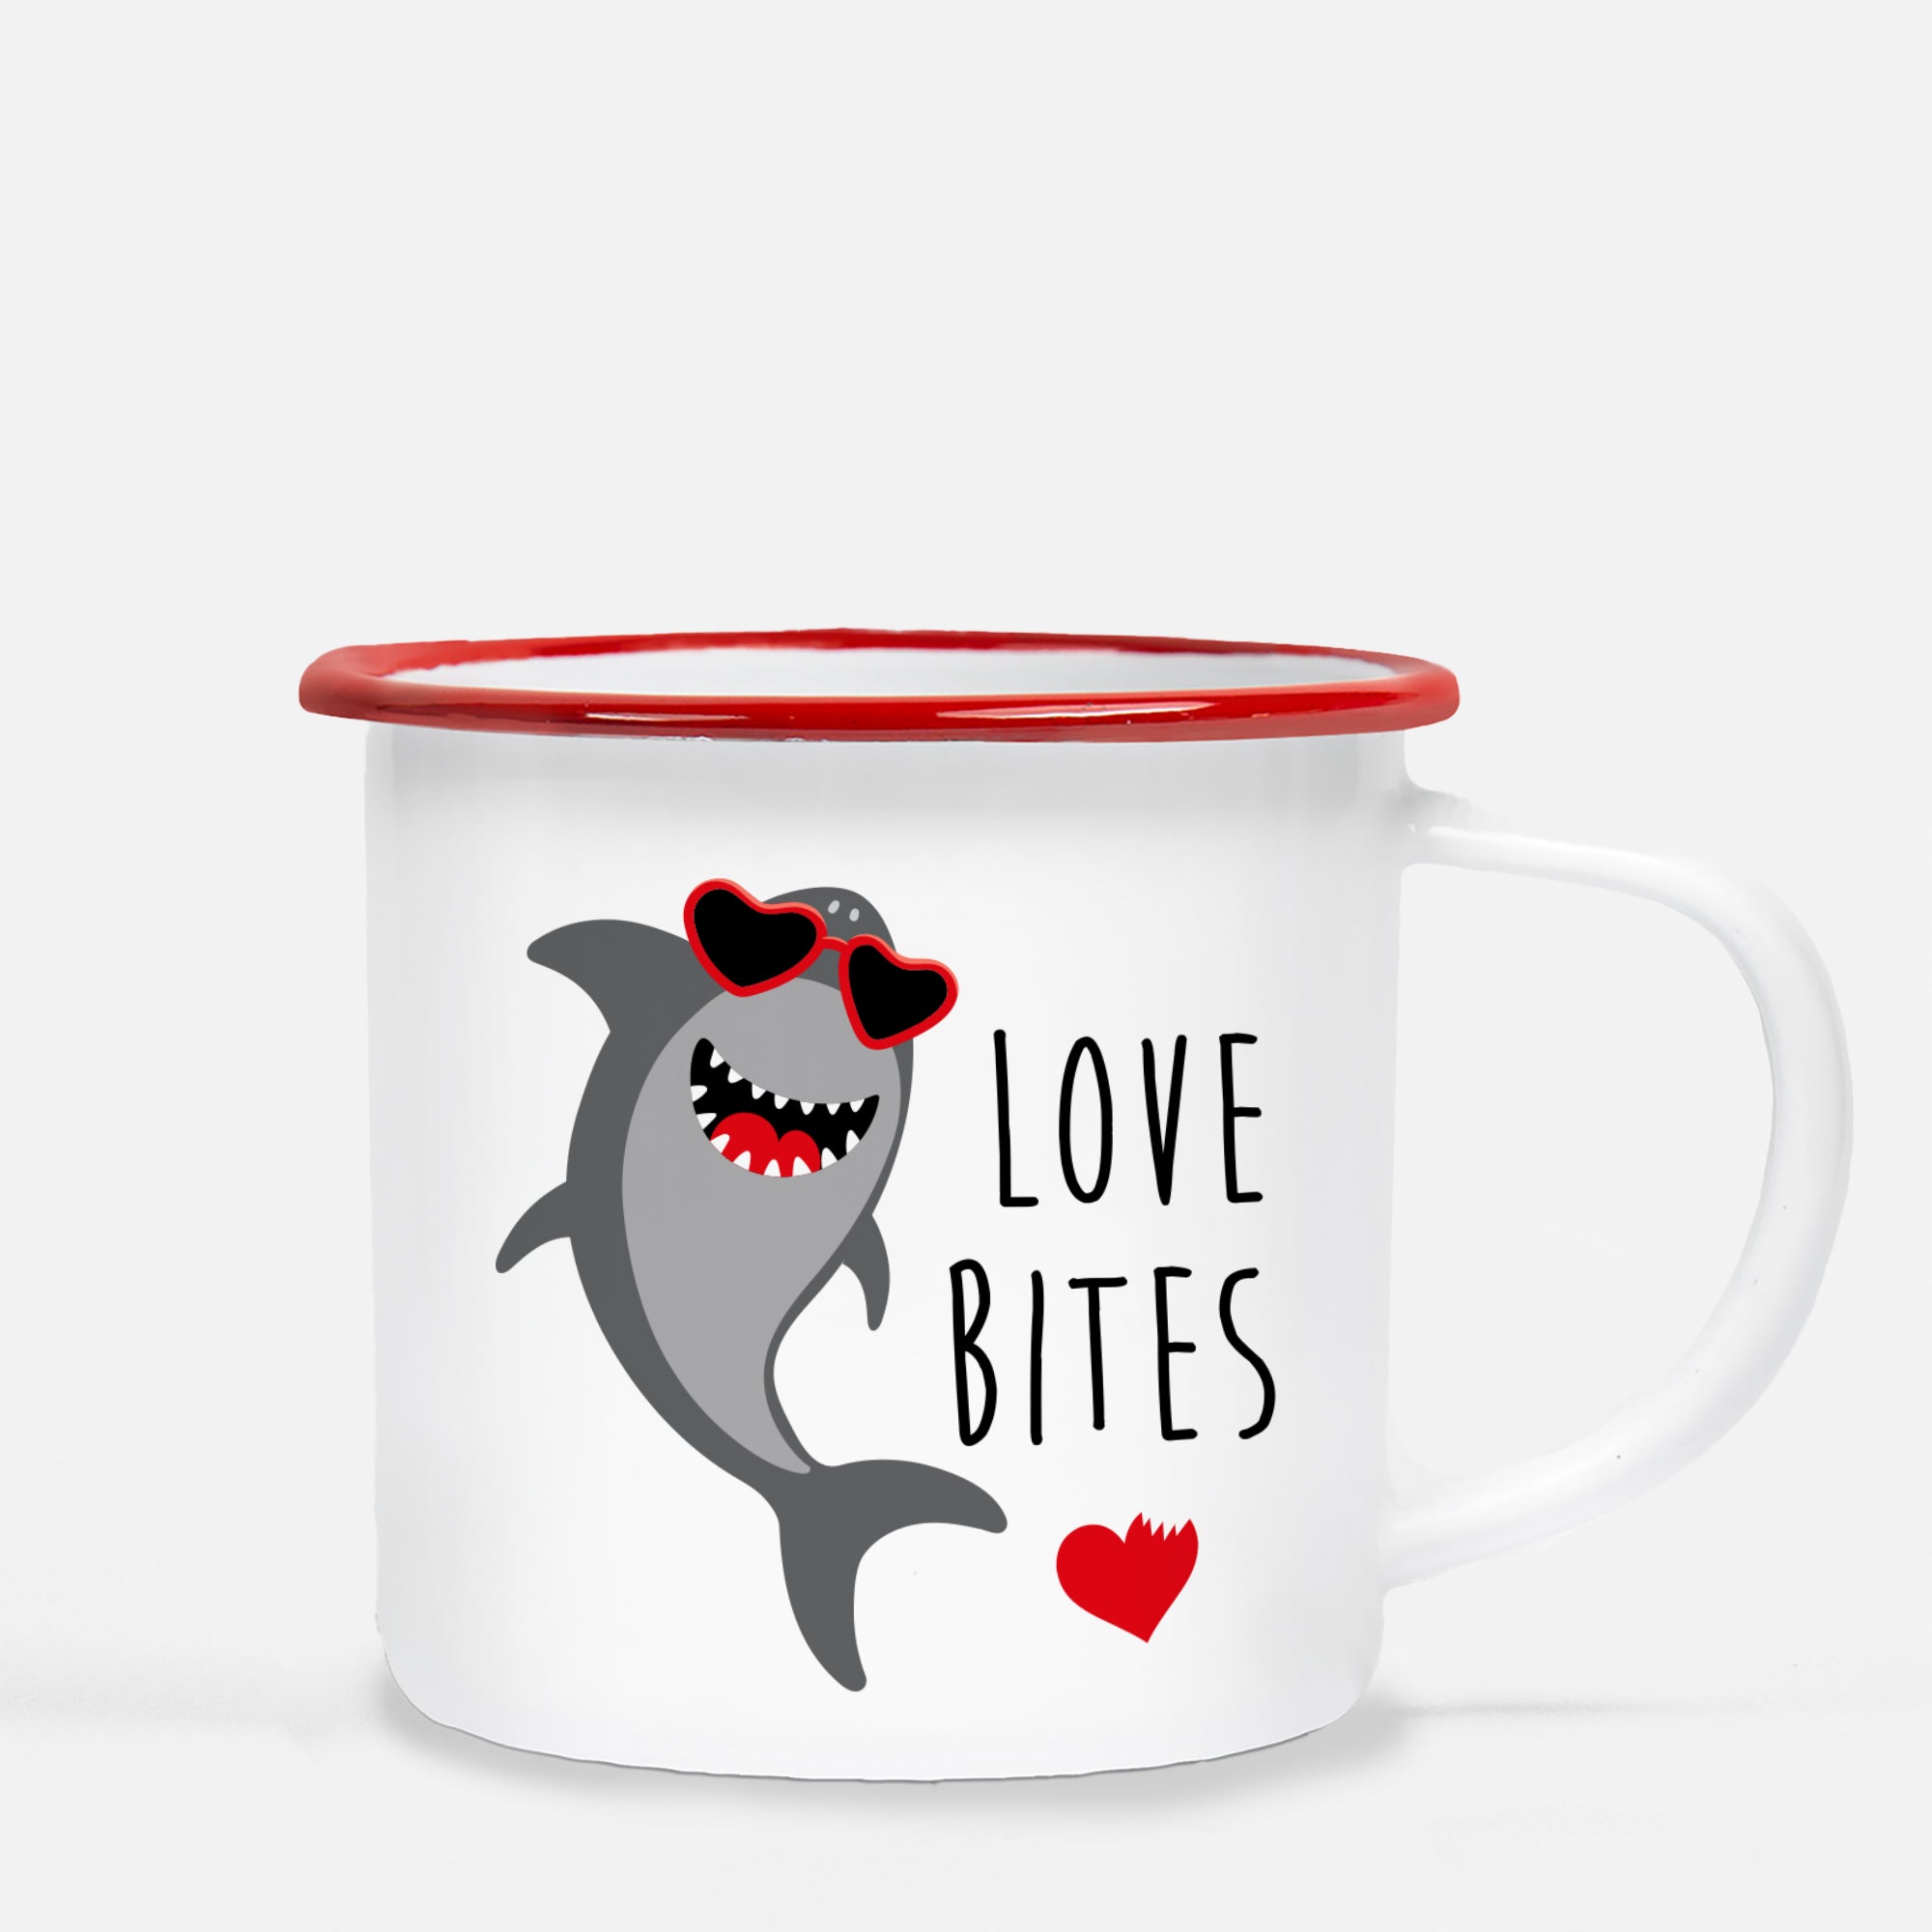 White enamel 12 oz metal camp mug with red lip | Shark love bites | Valentine's Day gift | Shark wearing heart glasses with a big smile | Pipsy.com